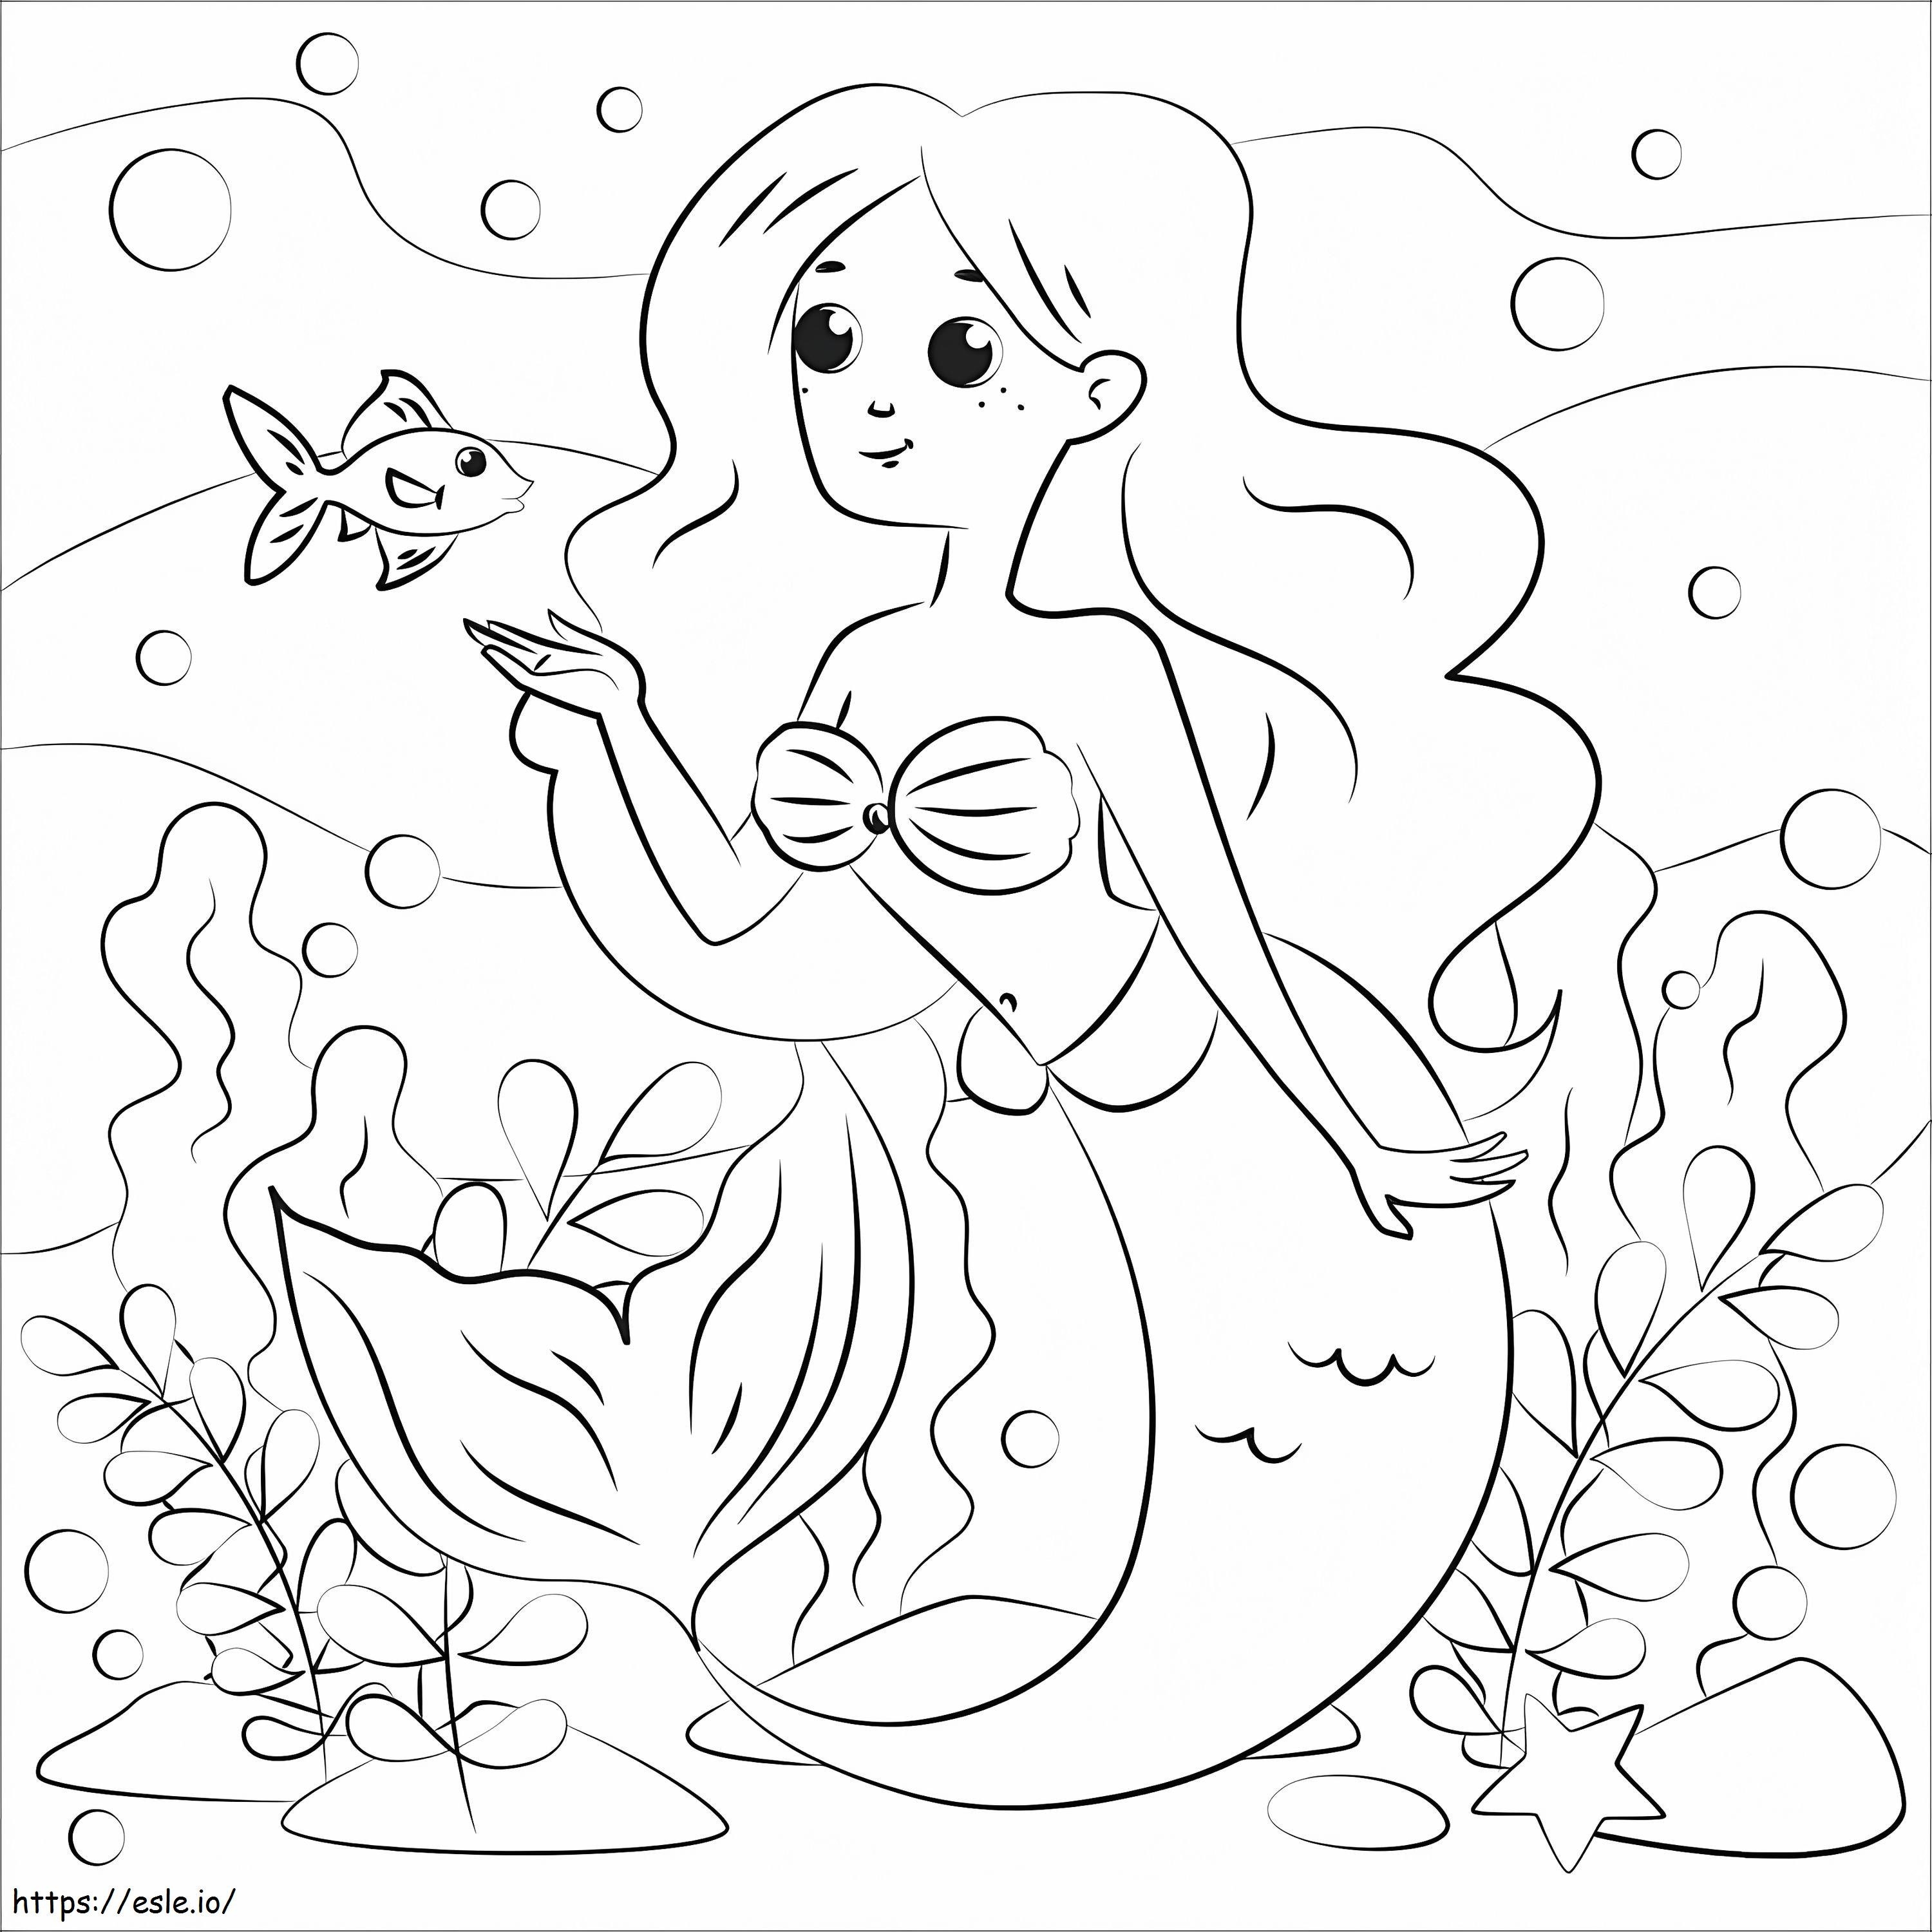 Mermaid With Fish coloring page